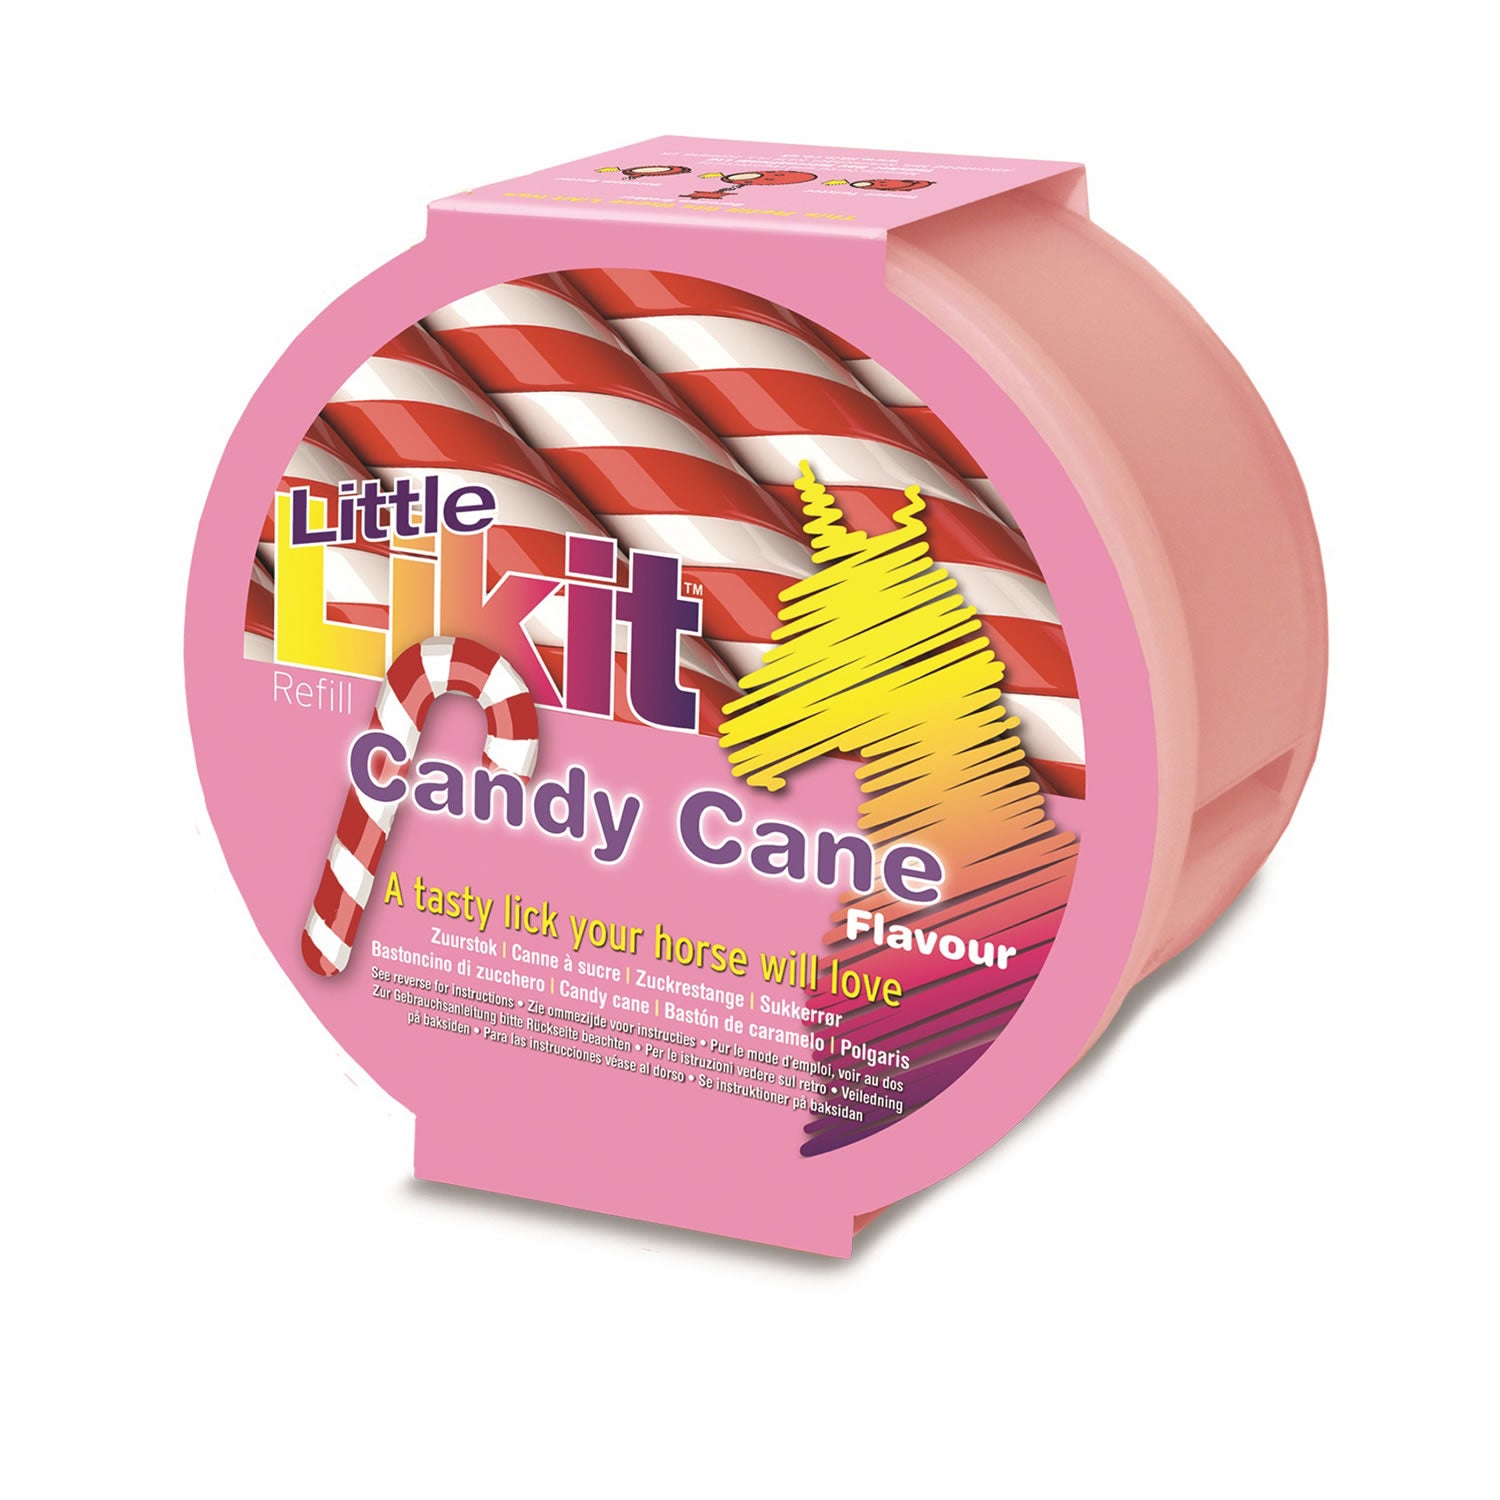 Little Likit Candy Cane Flavour Horse Treat 250g x 24 Pack 